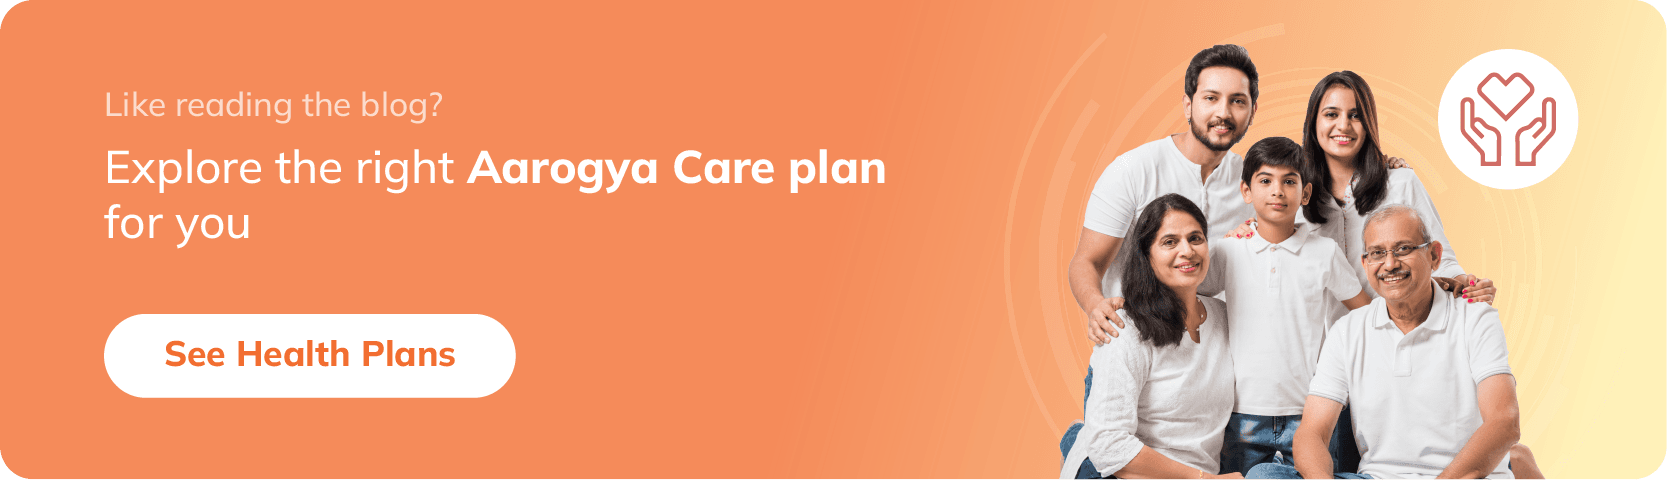 Aarogya Care Health Plans: A Guide to Affordable Healthcare Services banner